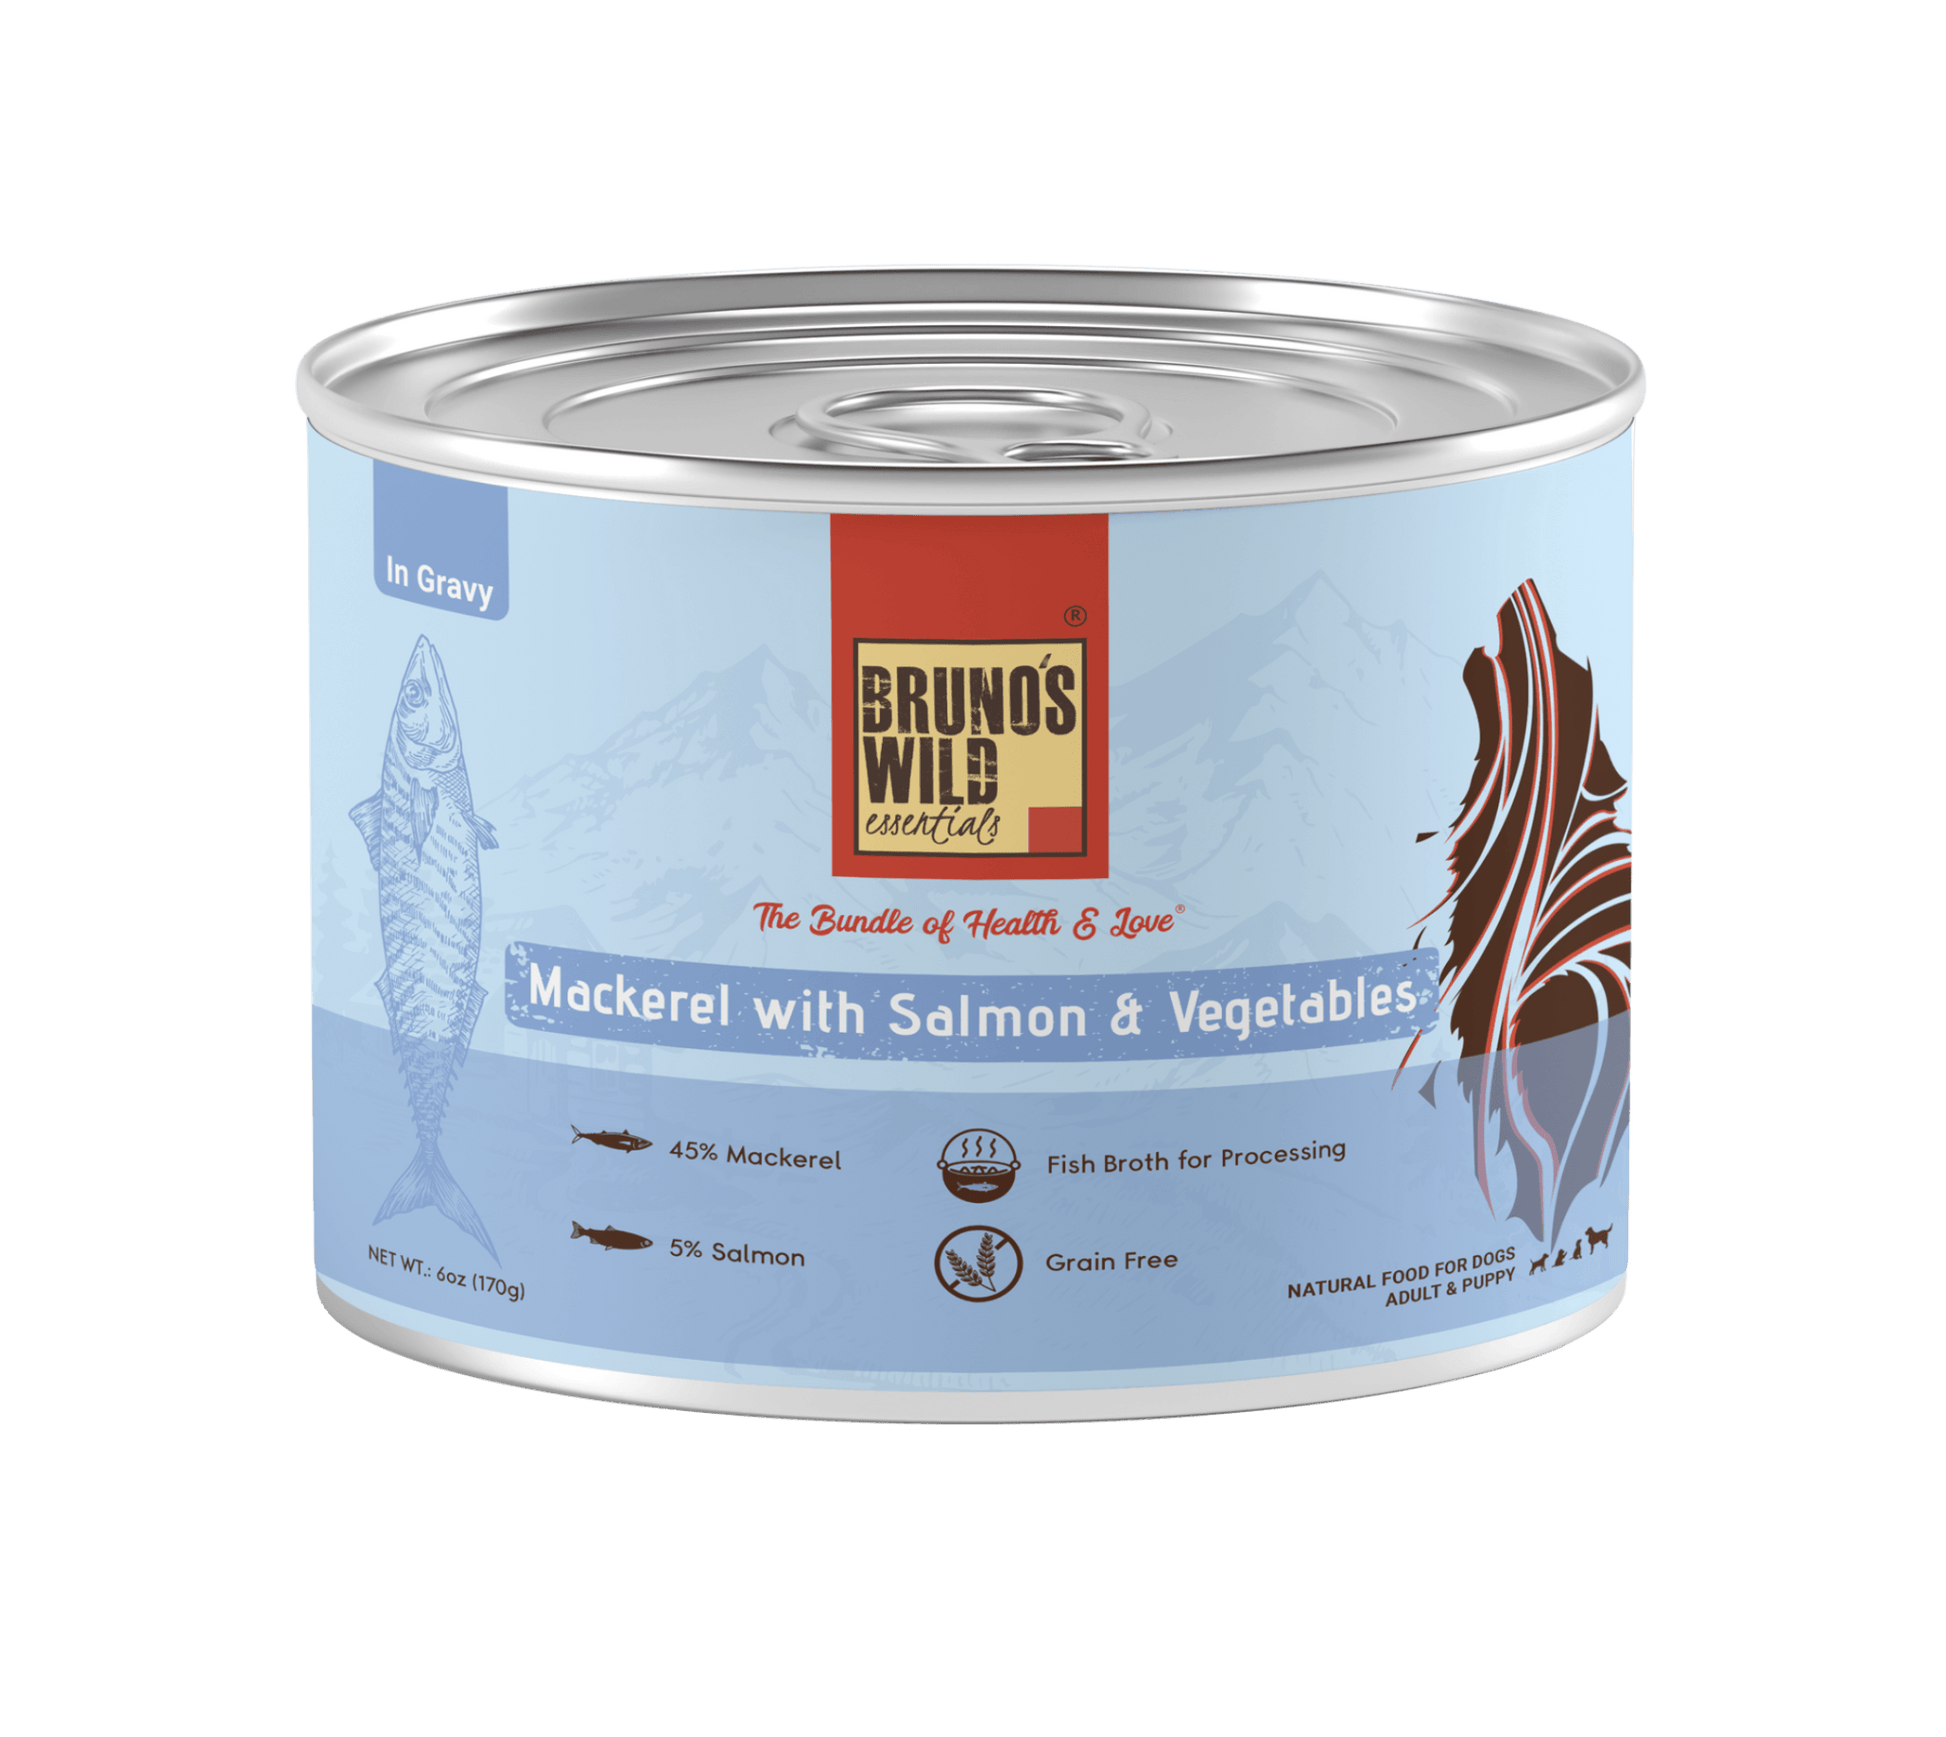 Bruno's Wild Essentials - Assorted Pack of 4 Dog Wet Food Cans - Wagr Petcare